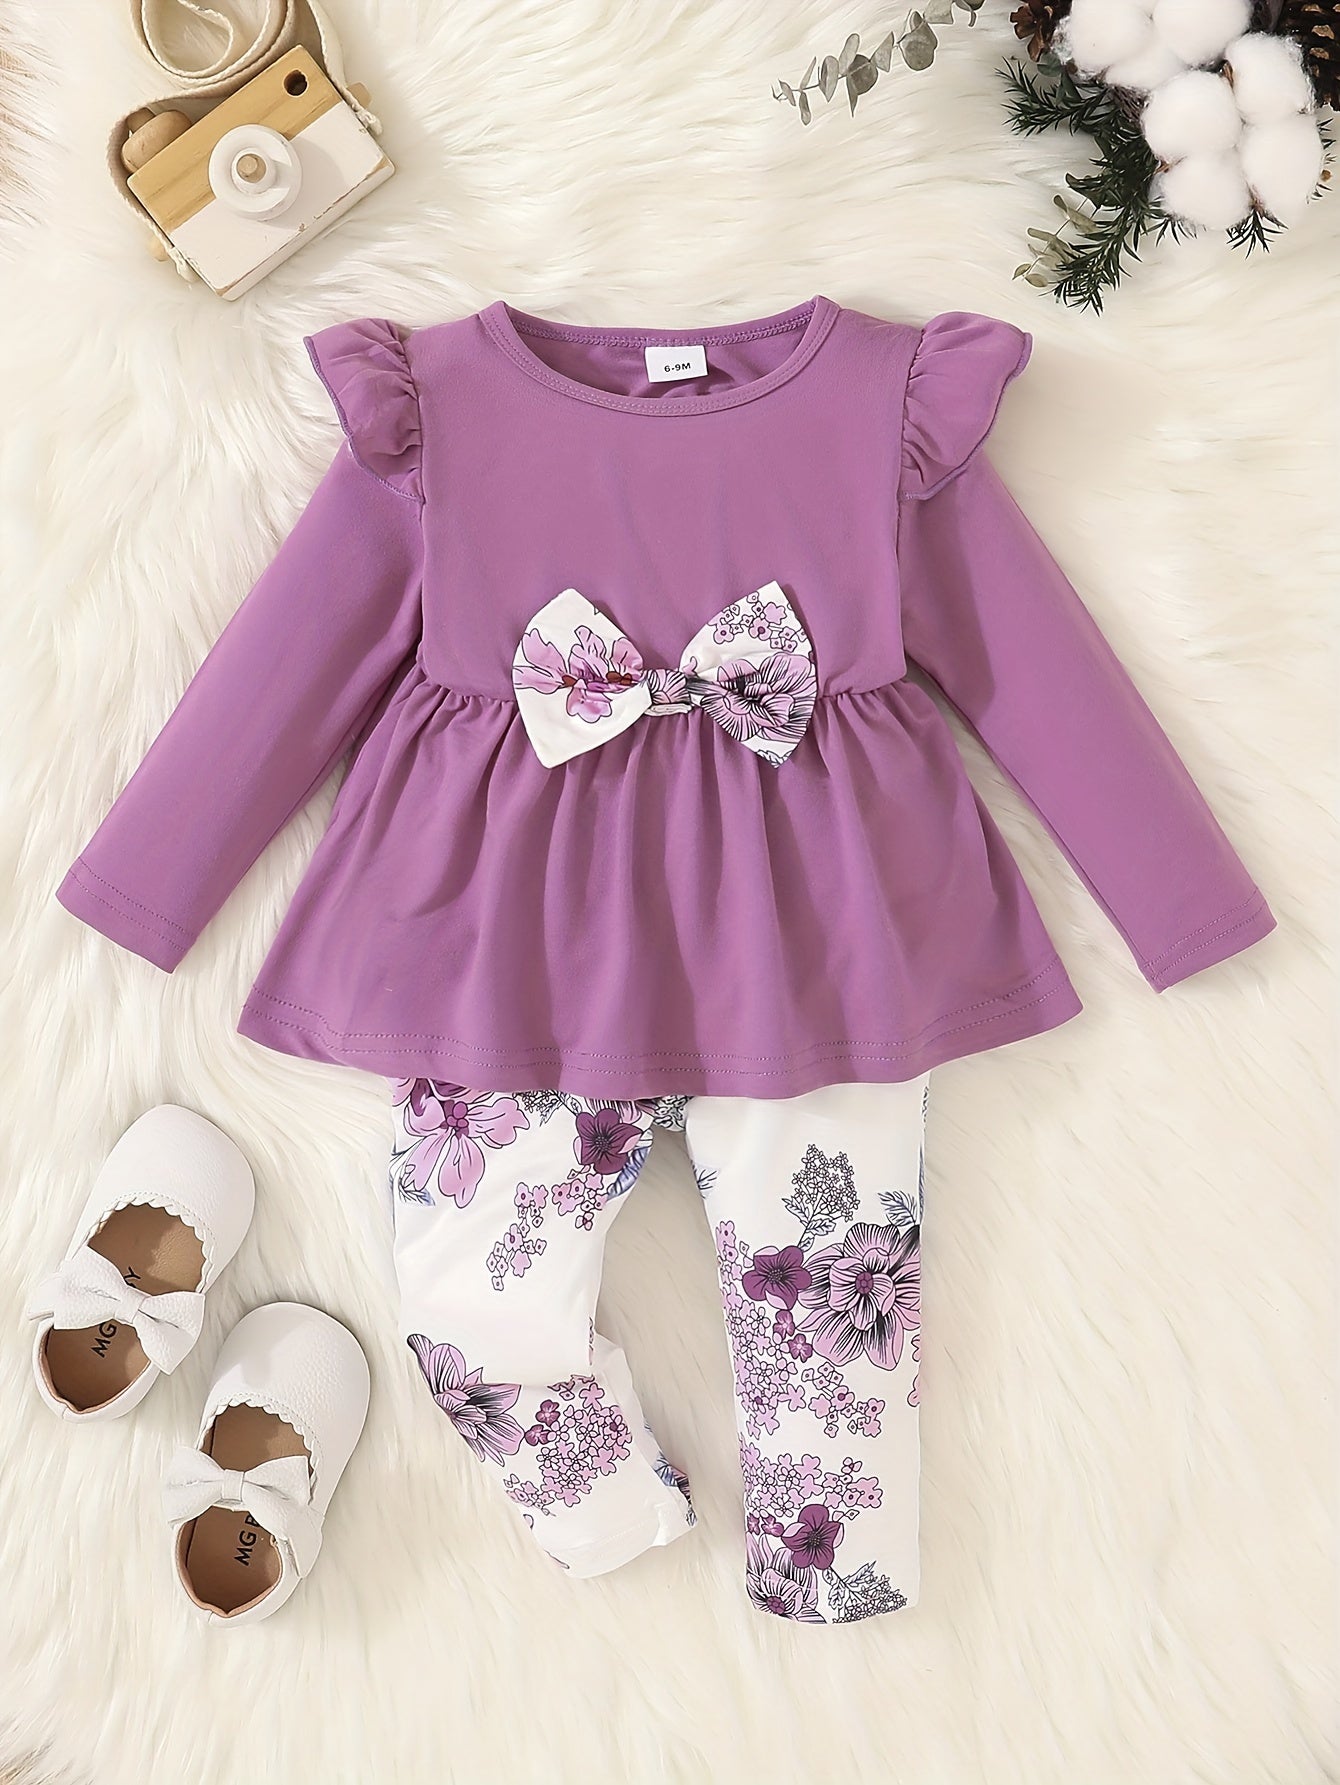 Baby Girl Baby Autumn Winter Outwear Outfit, Flutter Sleeve Splicing Bowknot Skirt Top &  Leaf Print Pants Set,